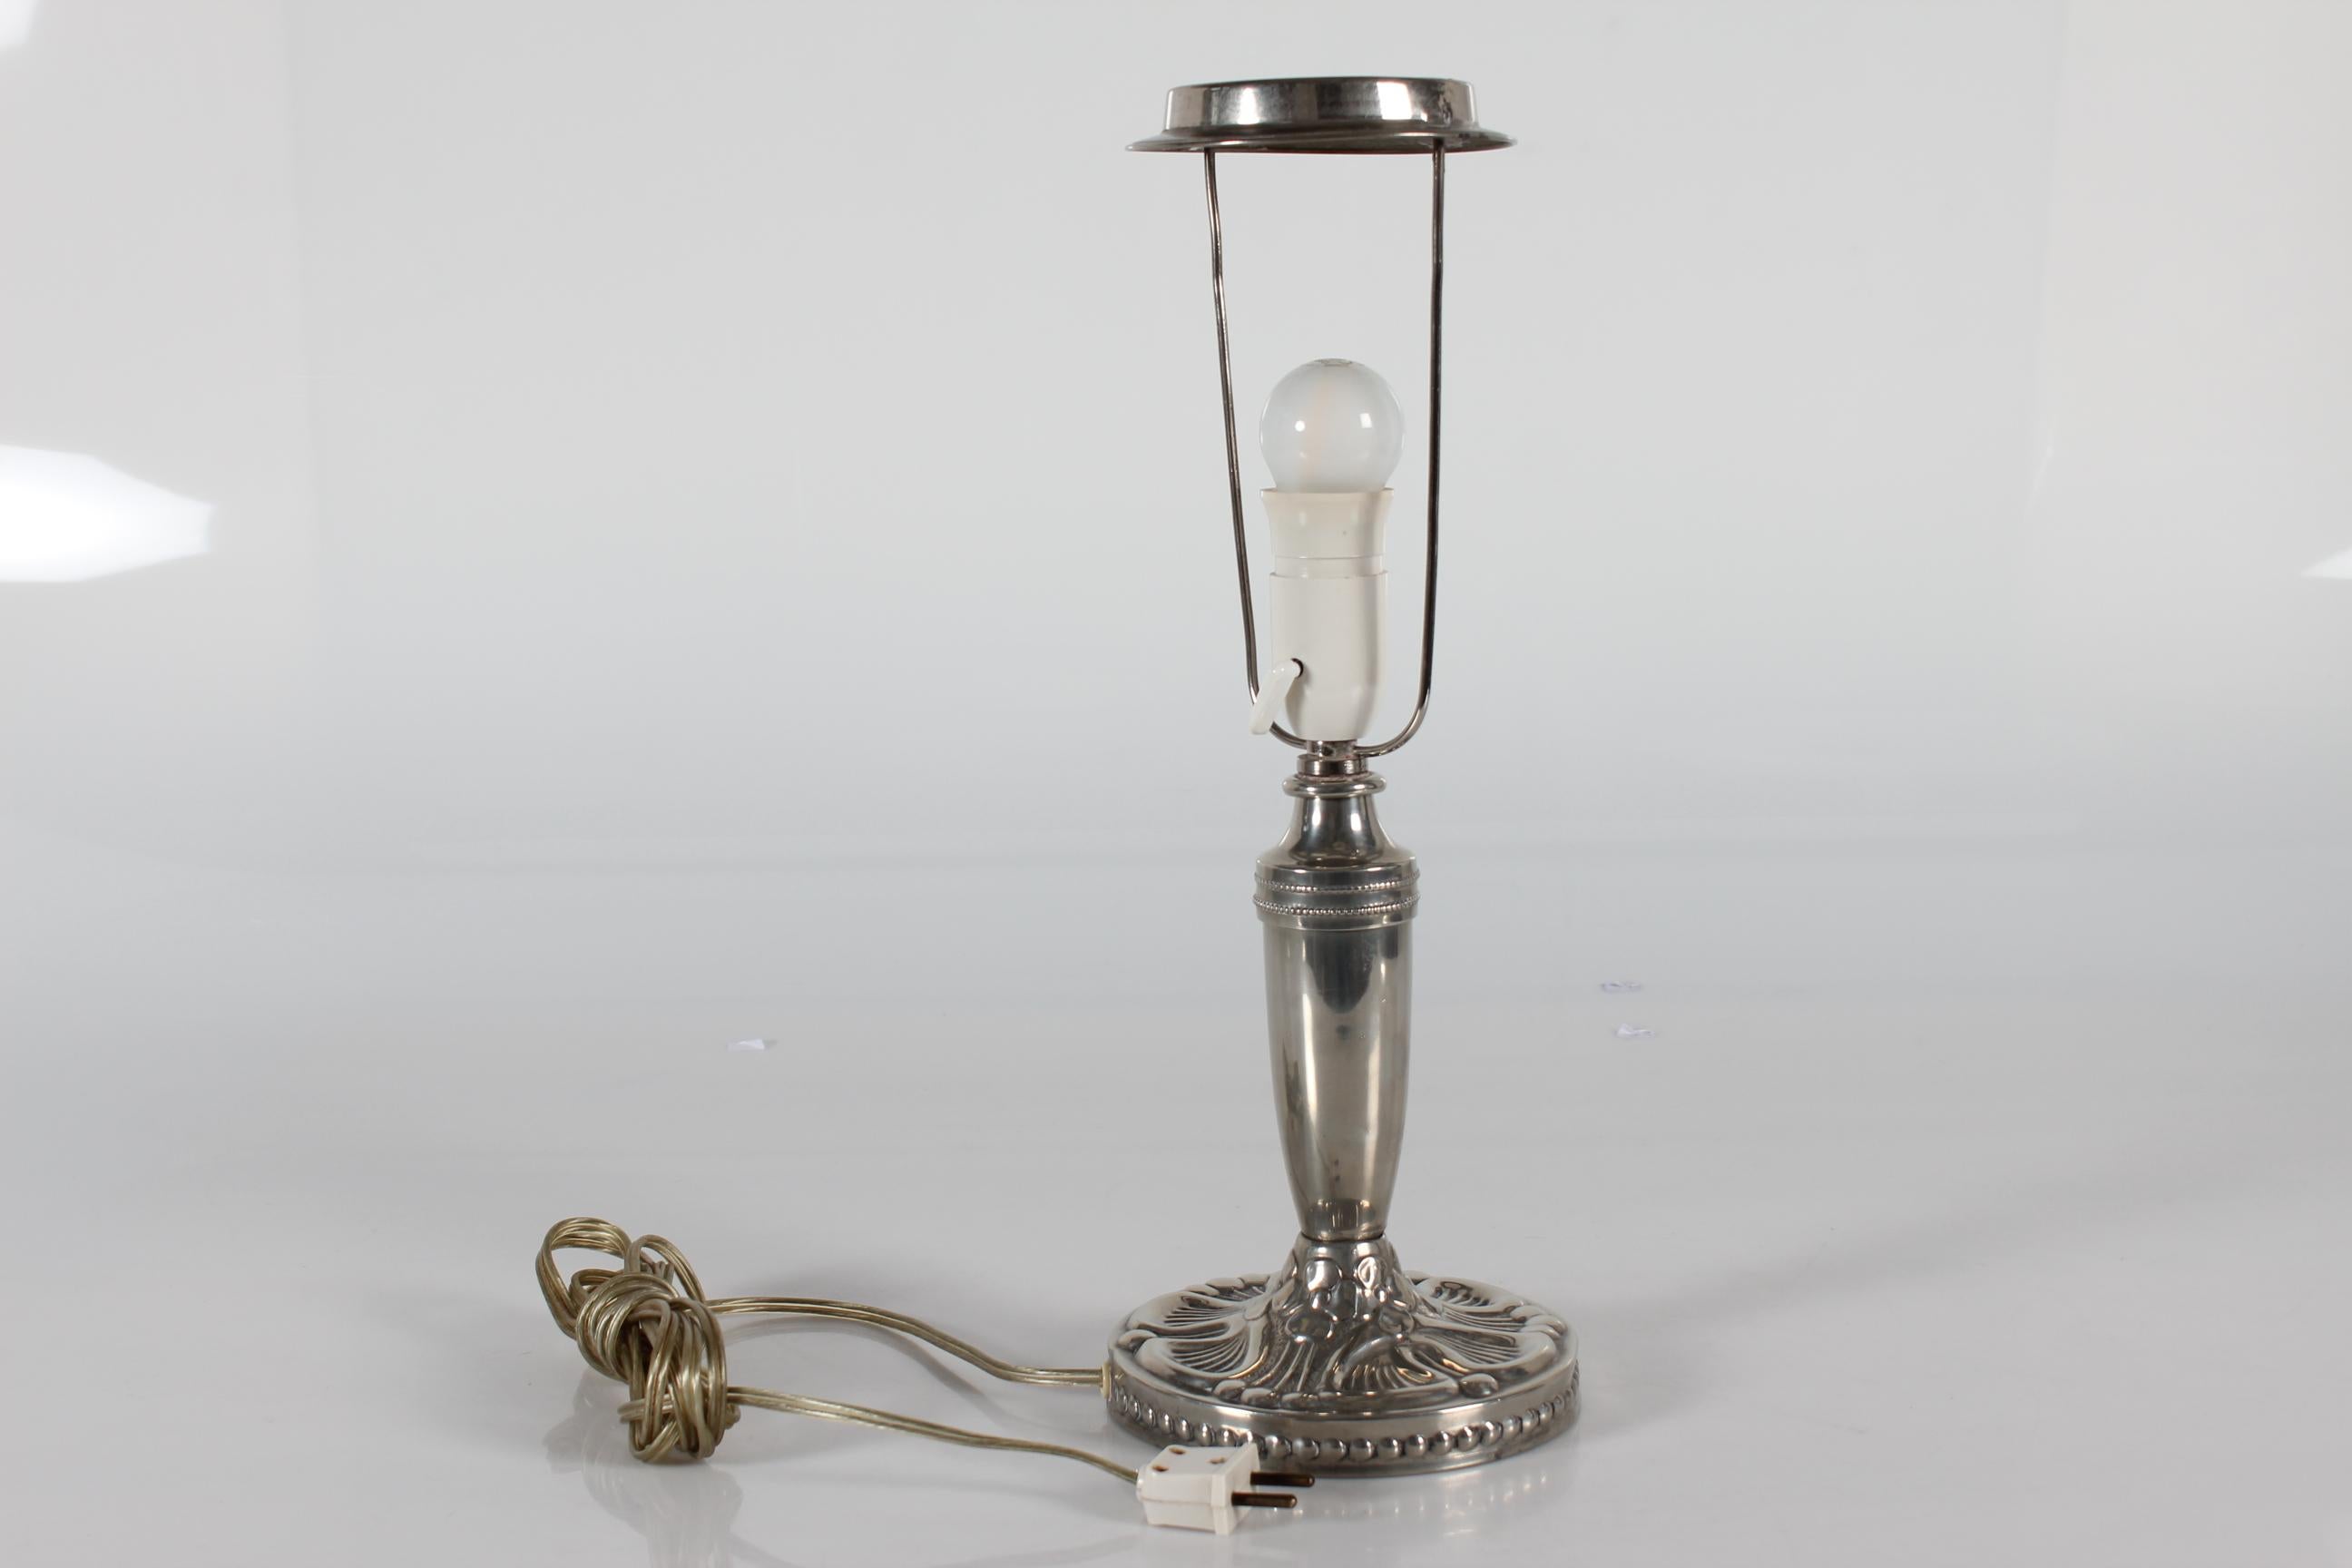 Danish Art Nouveau table lamp made of pewter with floral pattern.

The lamp is manufactured in Denmark in the period 1920s-1930s 

Included is a new lamp shade designed in Denmark. It is made of woven fabric with some texture and it is natural